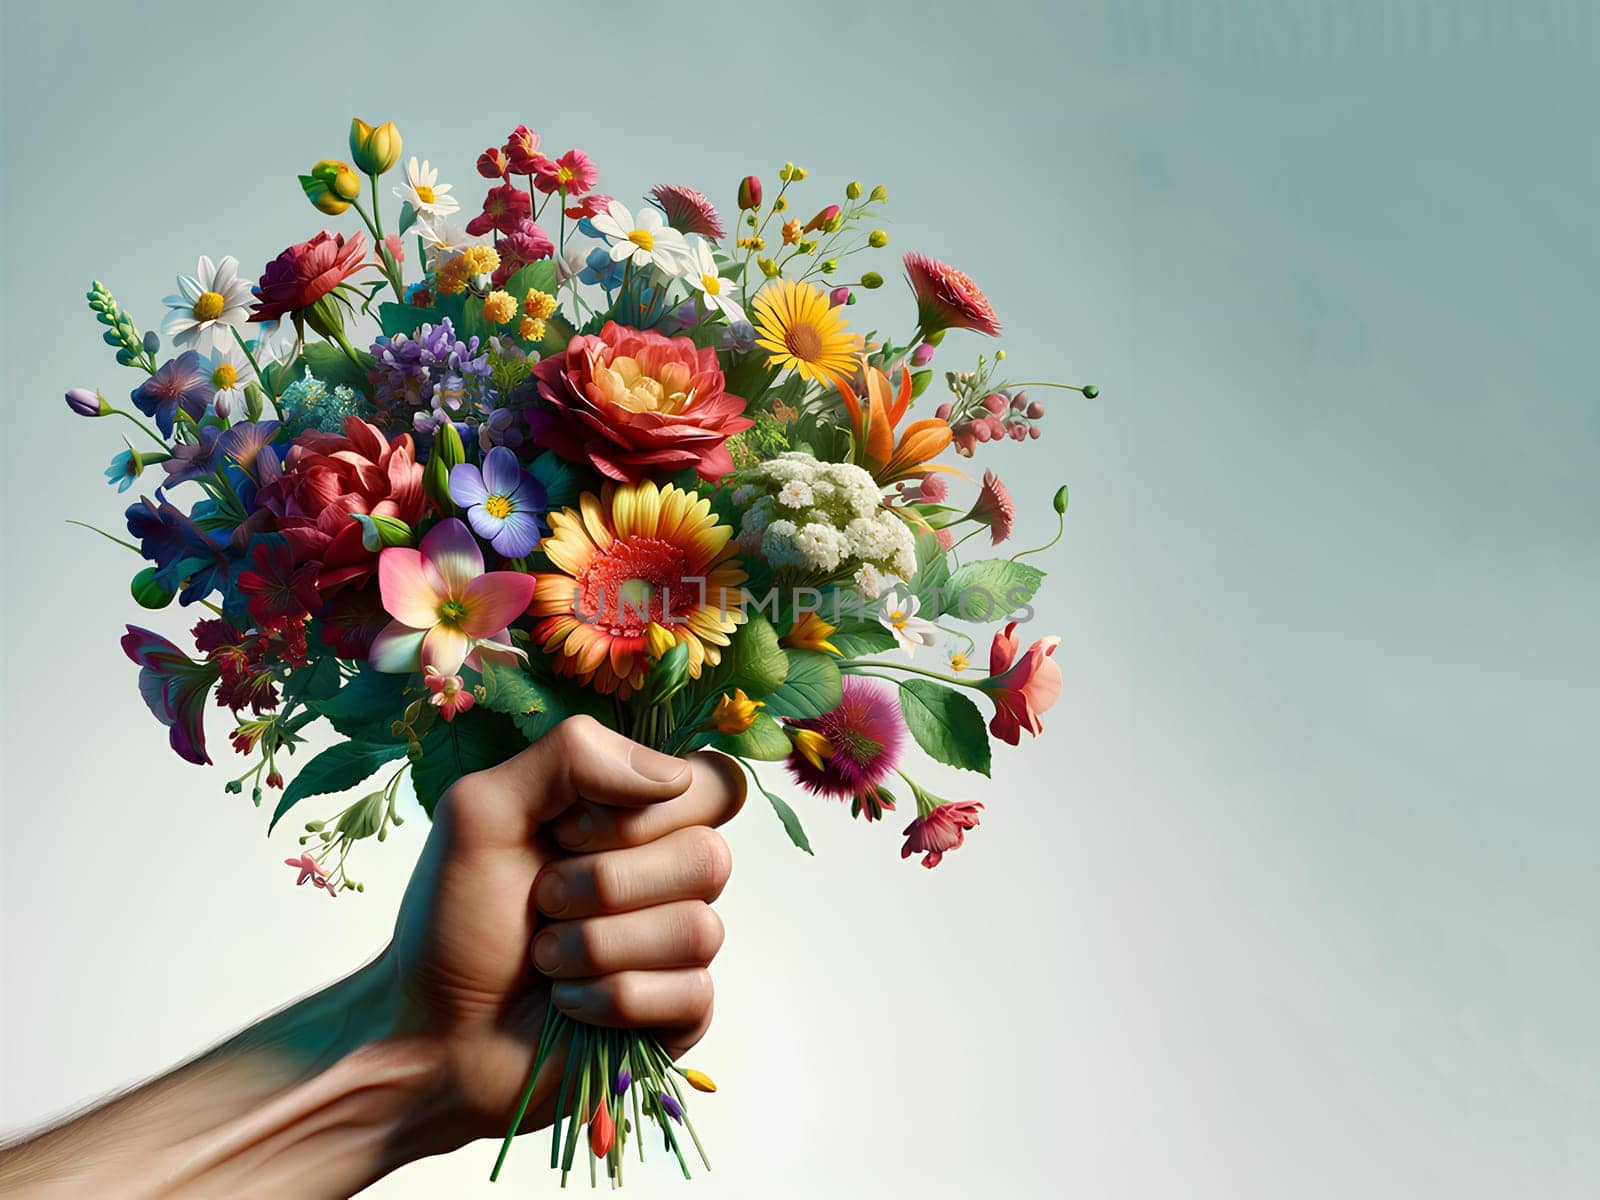 Beautiful bouquet in an outstretched hand on a blue background, copy space by Annado